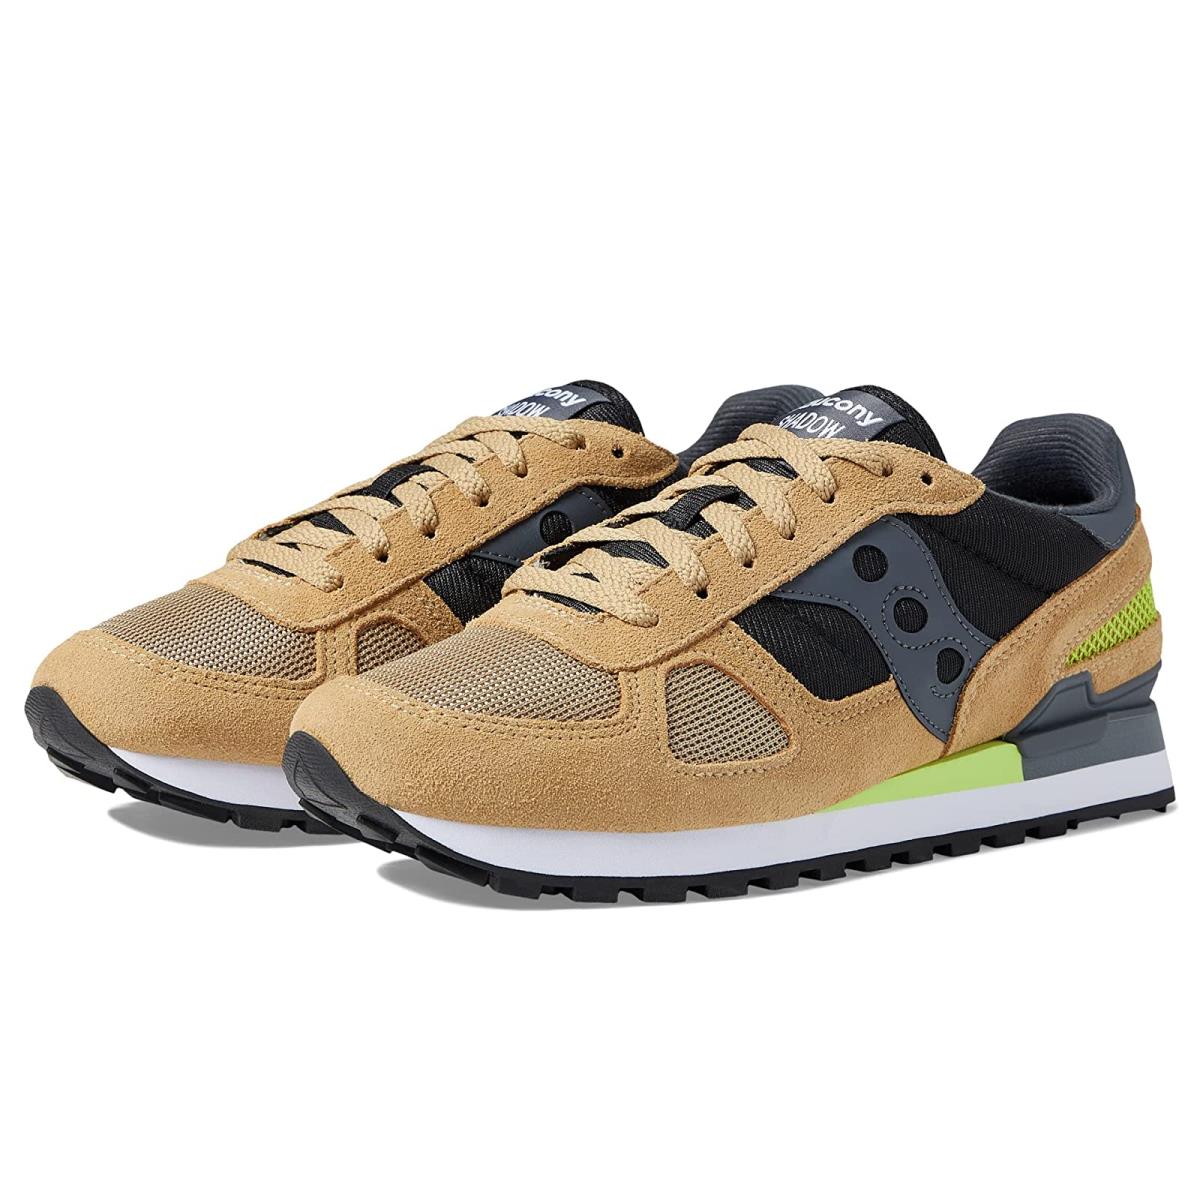 Unisex Sneakers Athletic Shoes Saucony s Shadow Khaki/Grey